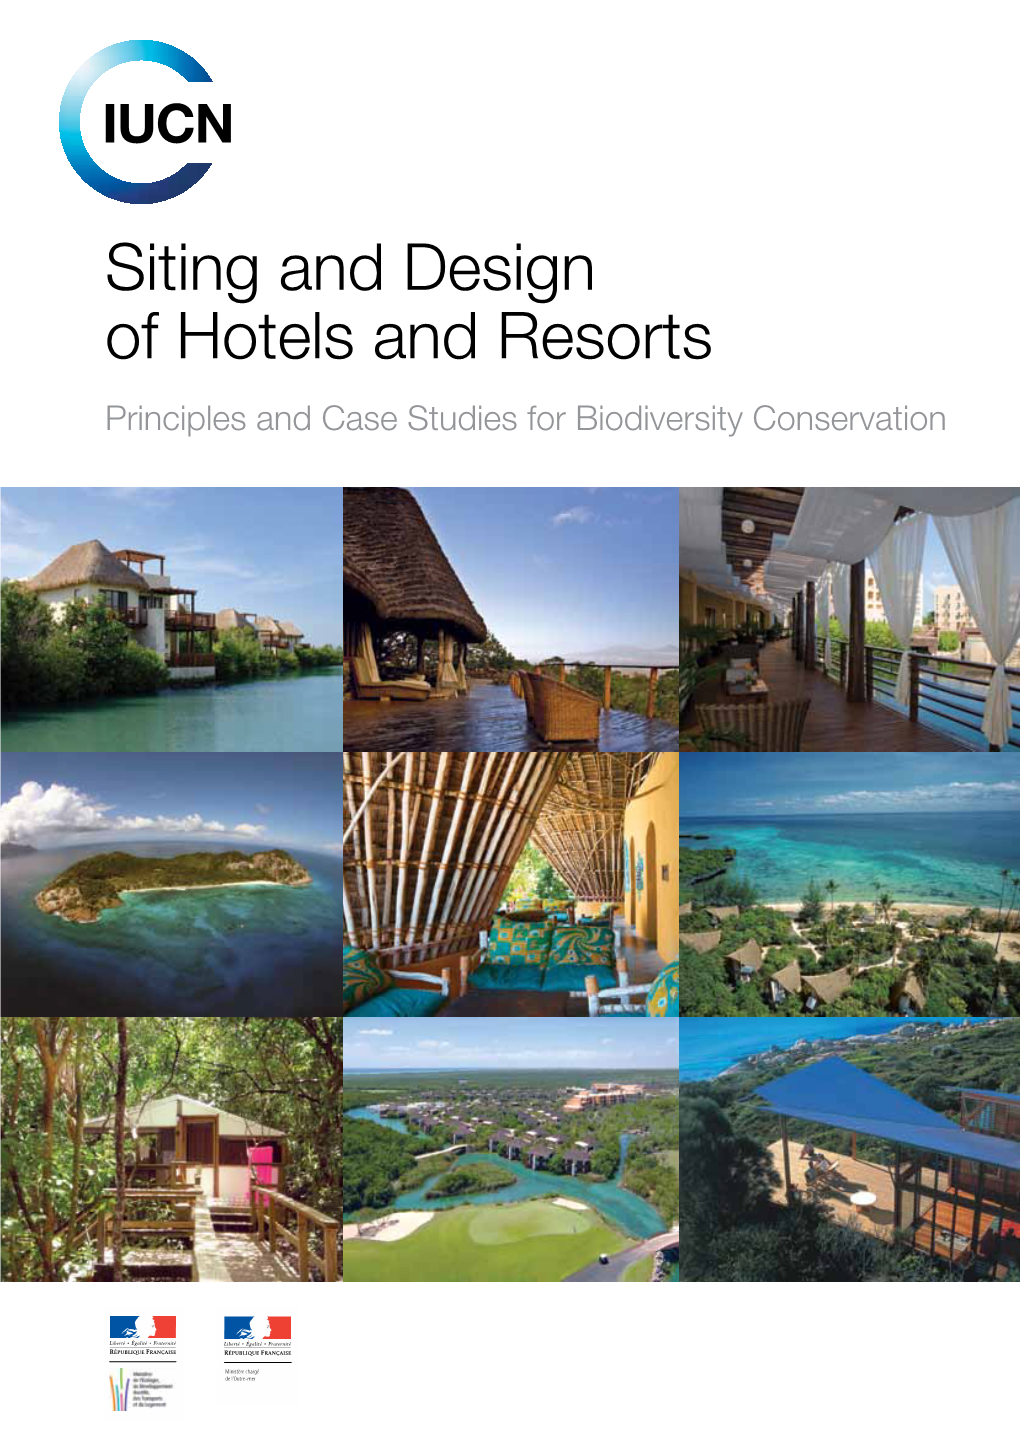 Siting and Design of Hotels and Resorts